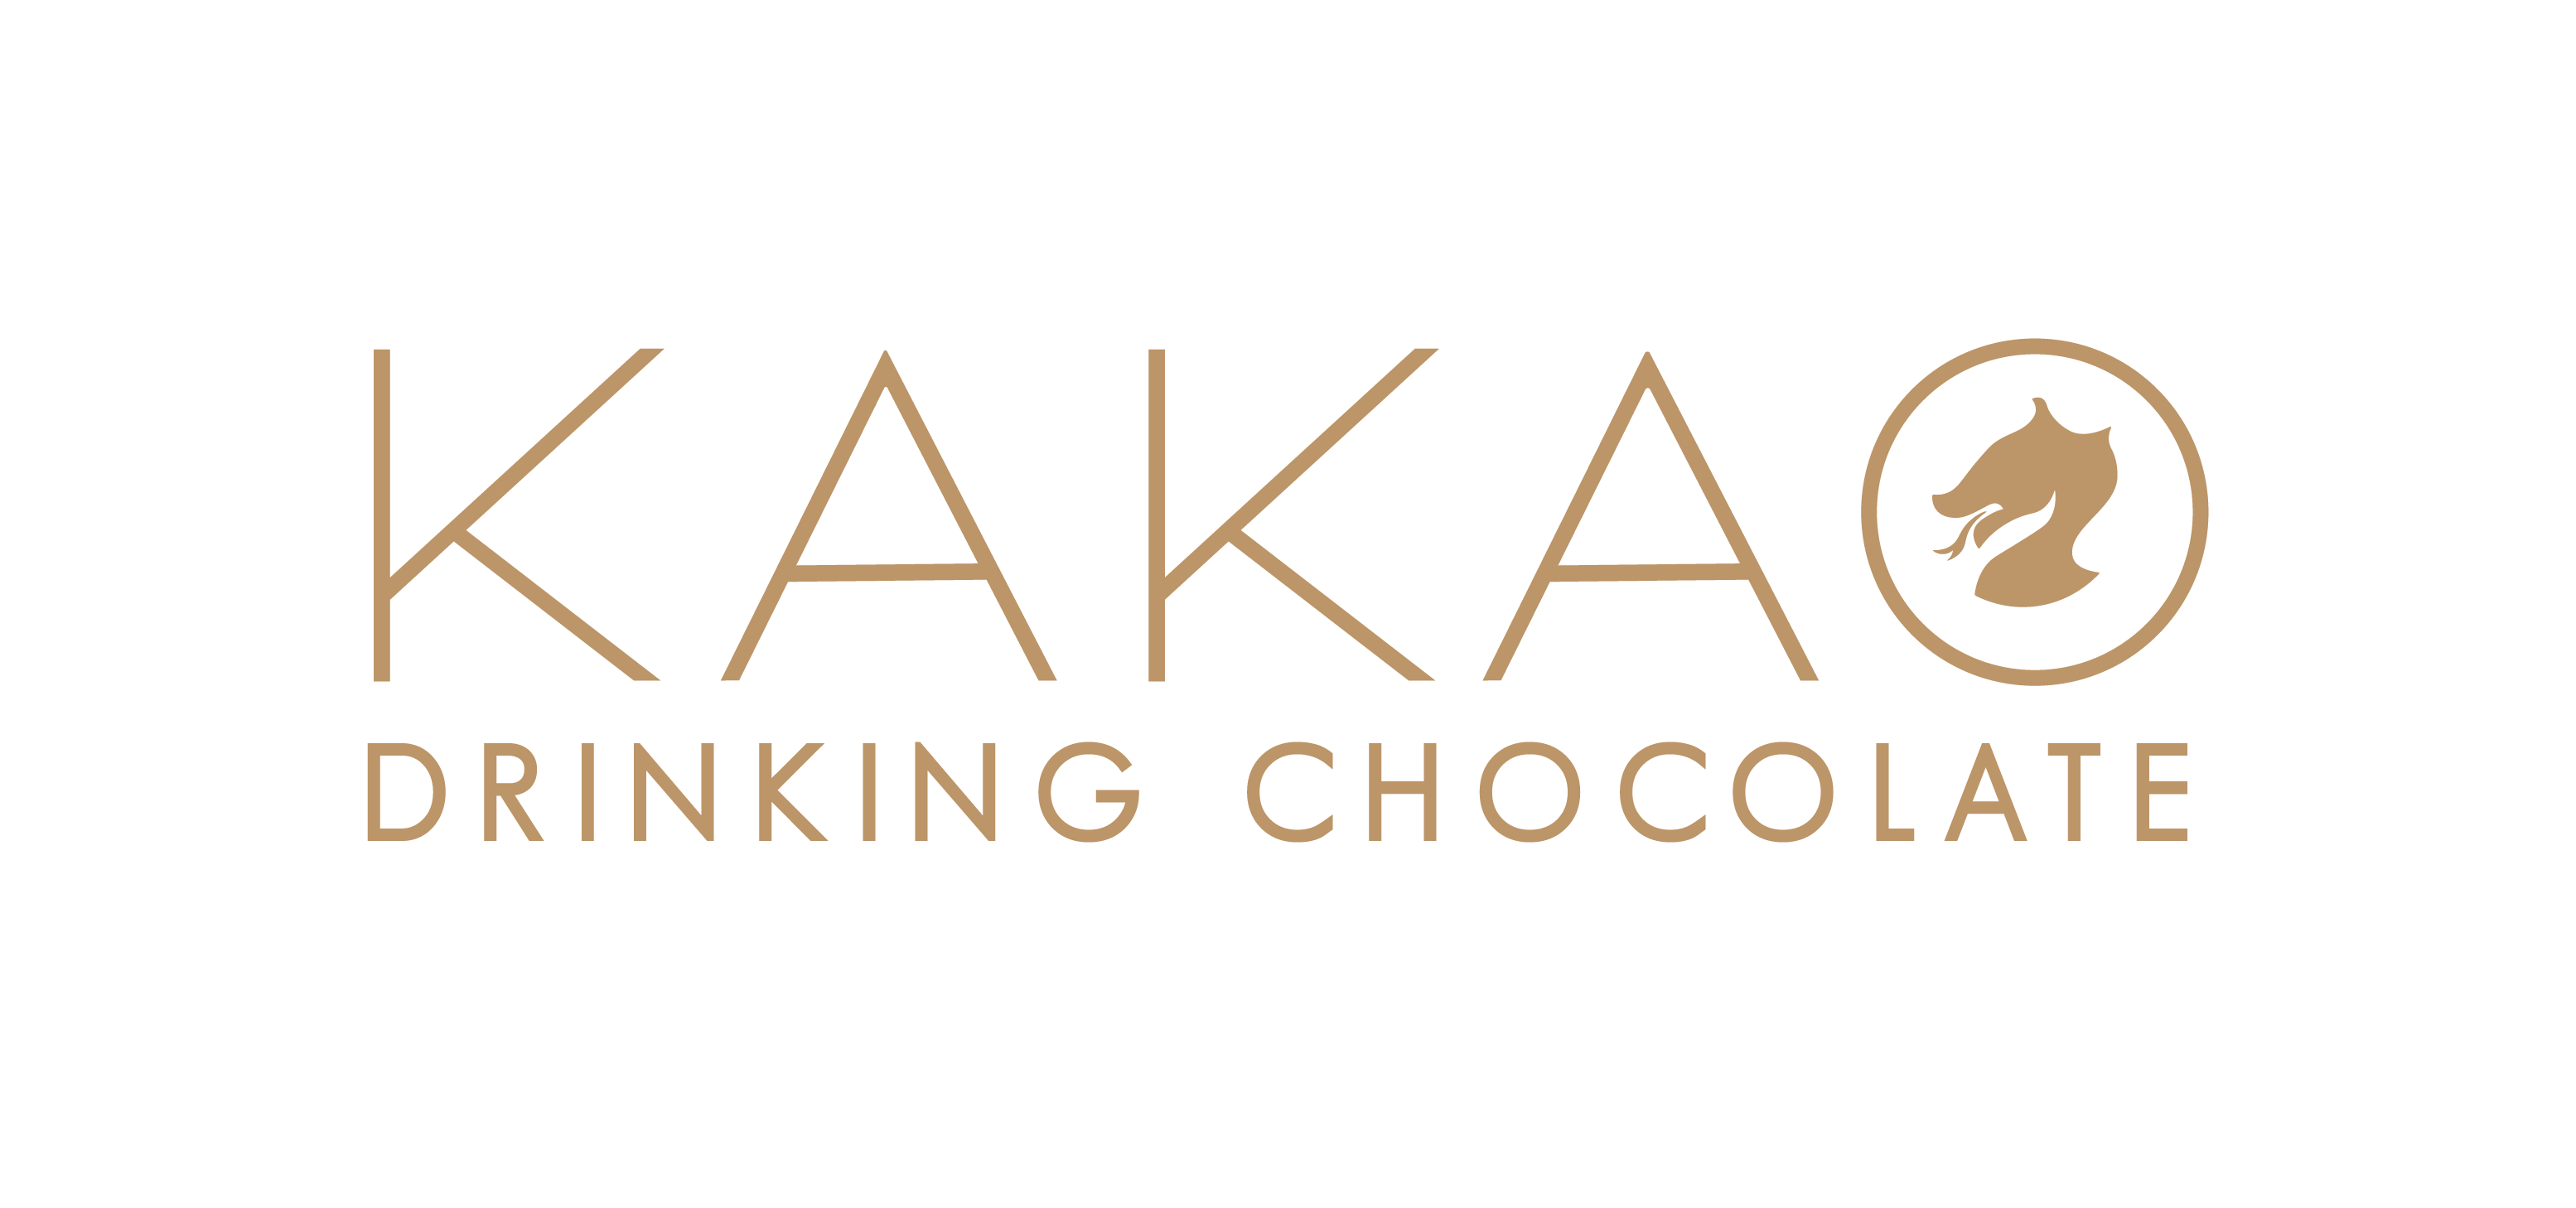 ColaCao: Meet the famous Spanish Chocolate drink — ARC IBERICO IMPORTS